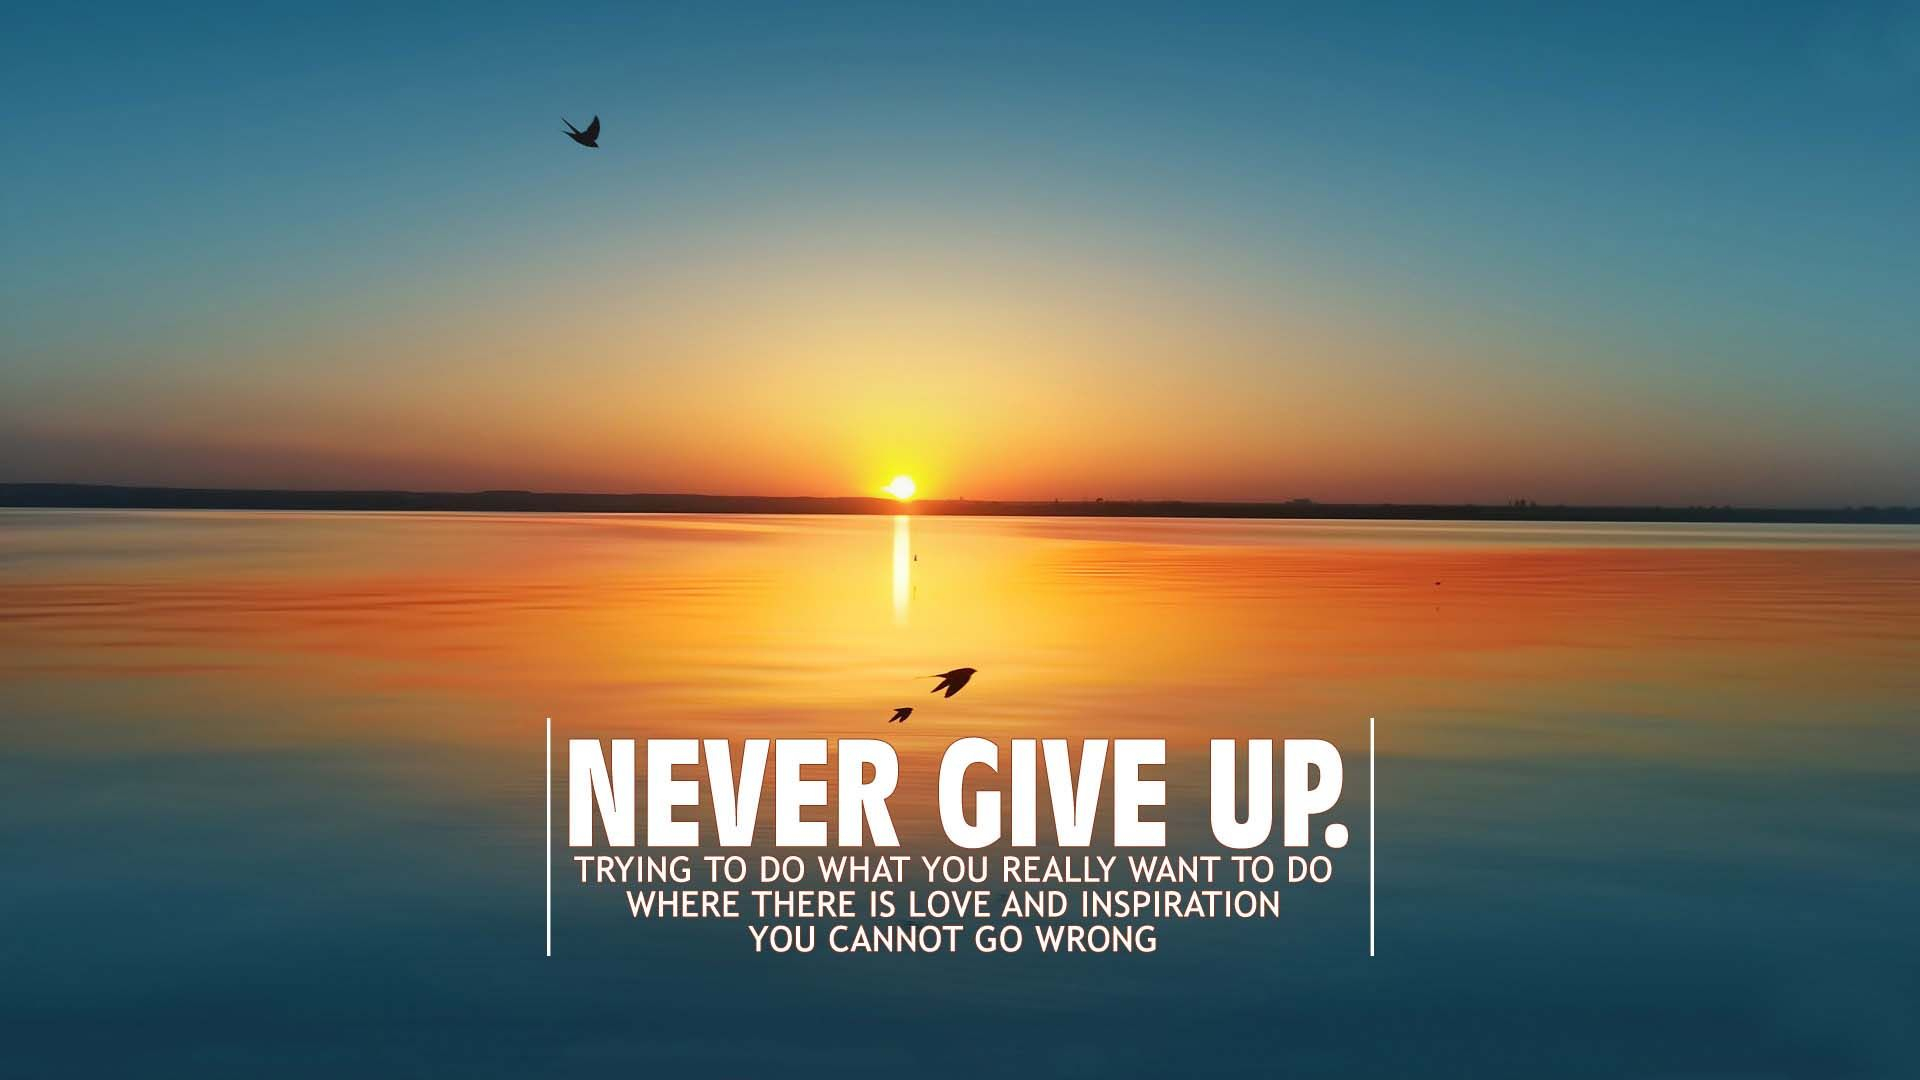 Motivation Never Give Up Quotes Never Give Up | Hd Motivation Wallpapers For Mobile And Desktop